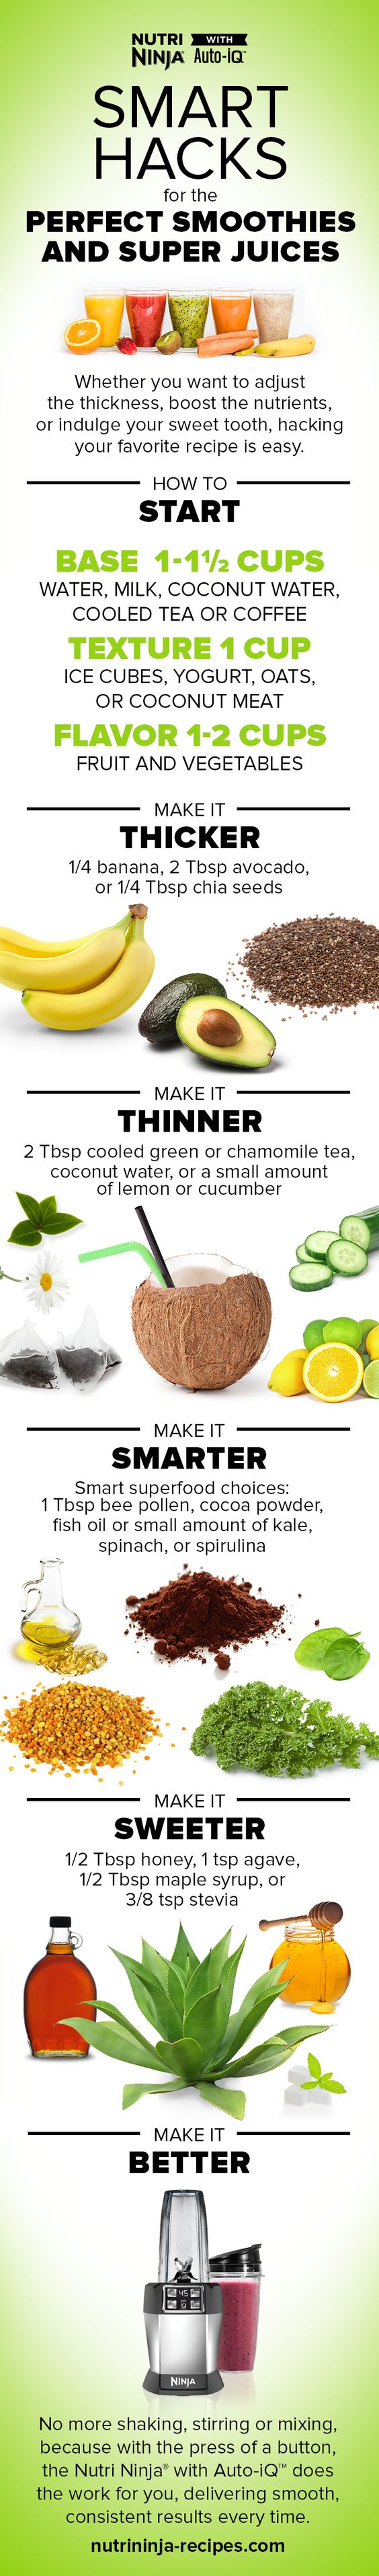 smart-hacks-for-the-perfect-smoothies-super-juices